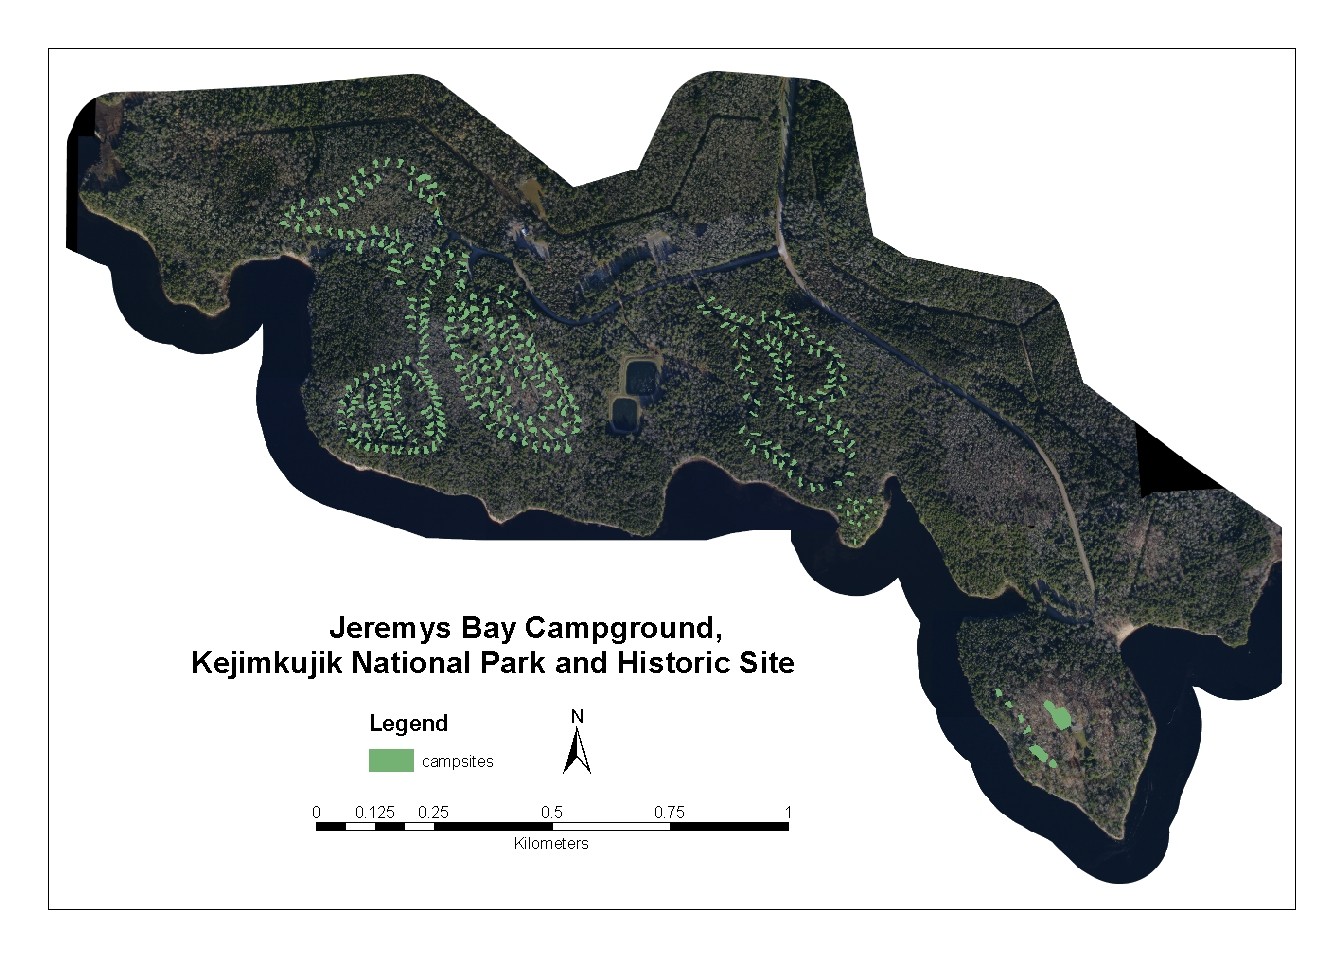 25 cm aerial photos of Jeremys Bay Campground, Kejimkujik National Park and Historic Site